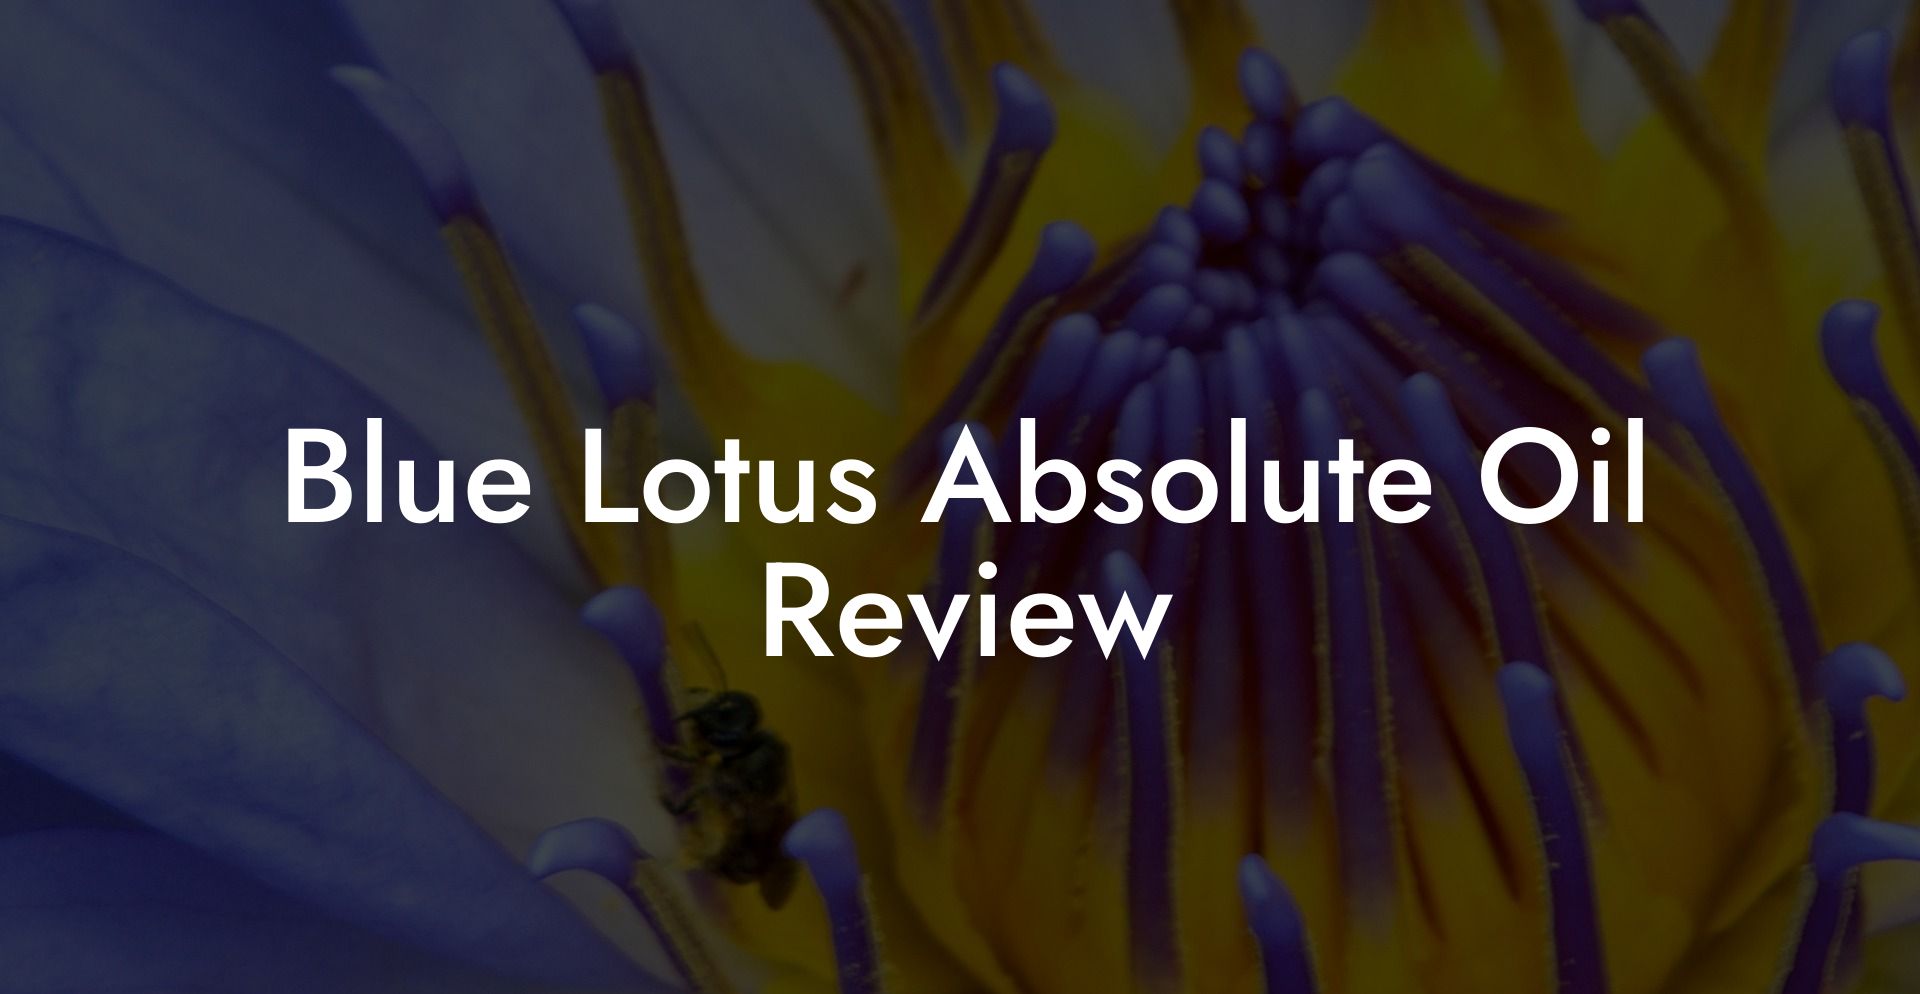 Blue Lotus Absolute Oil Review